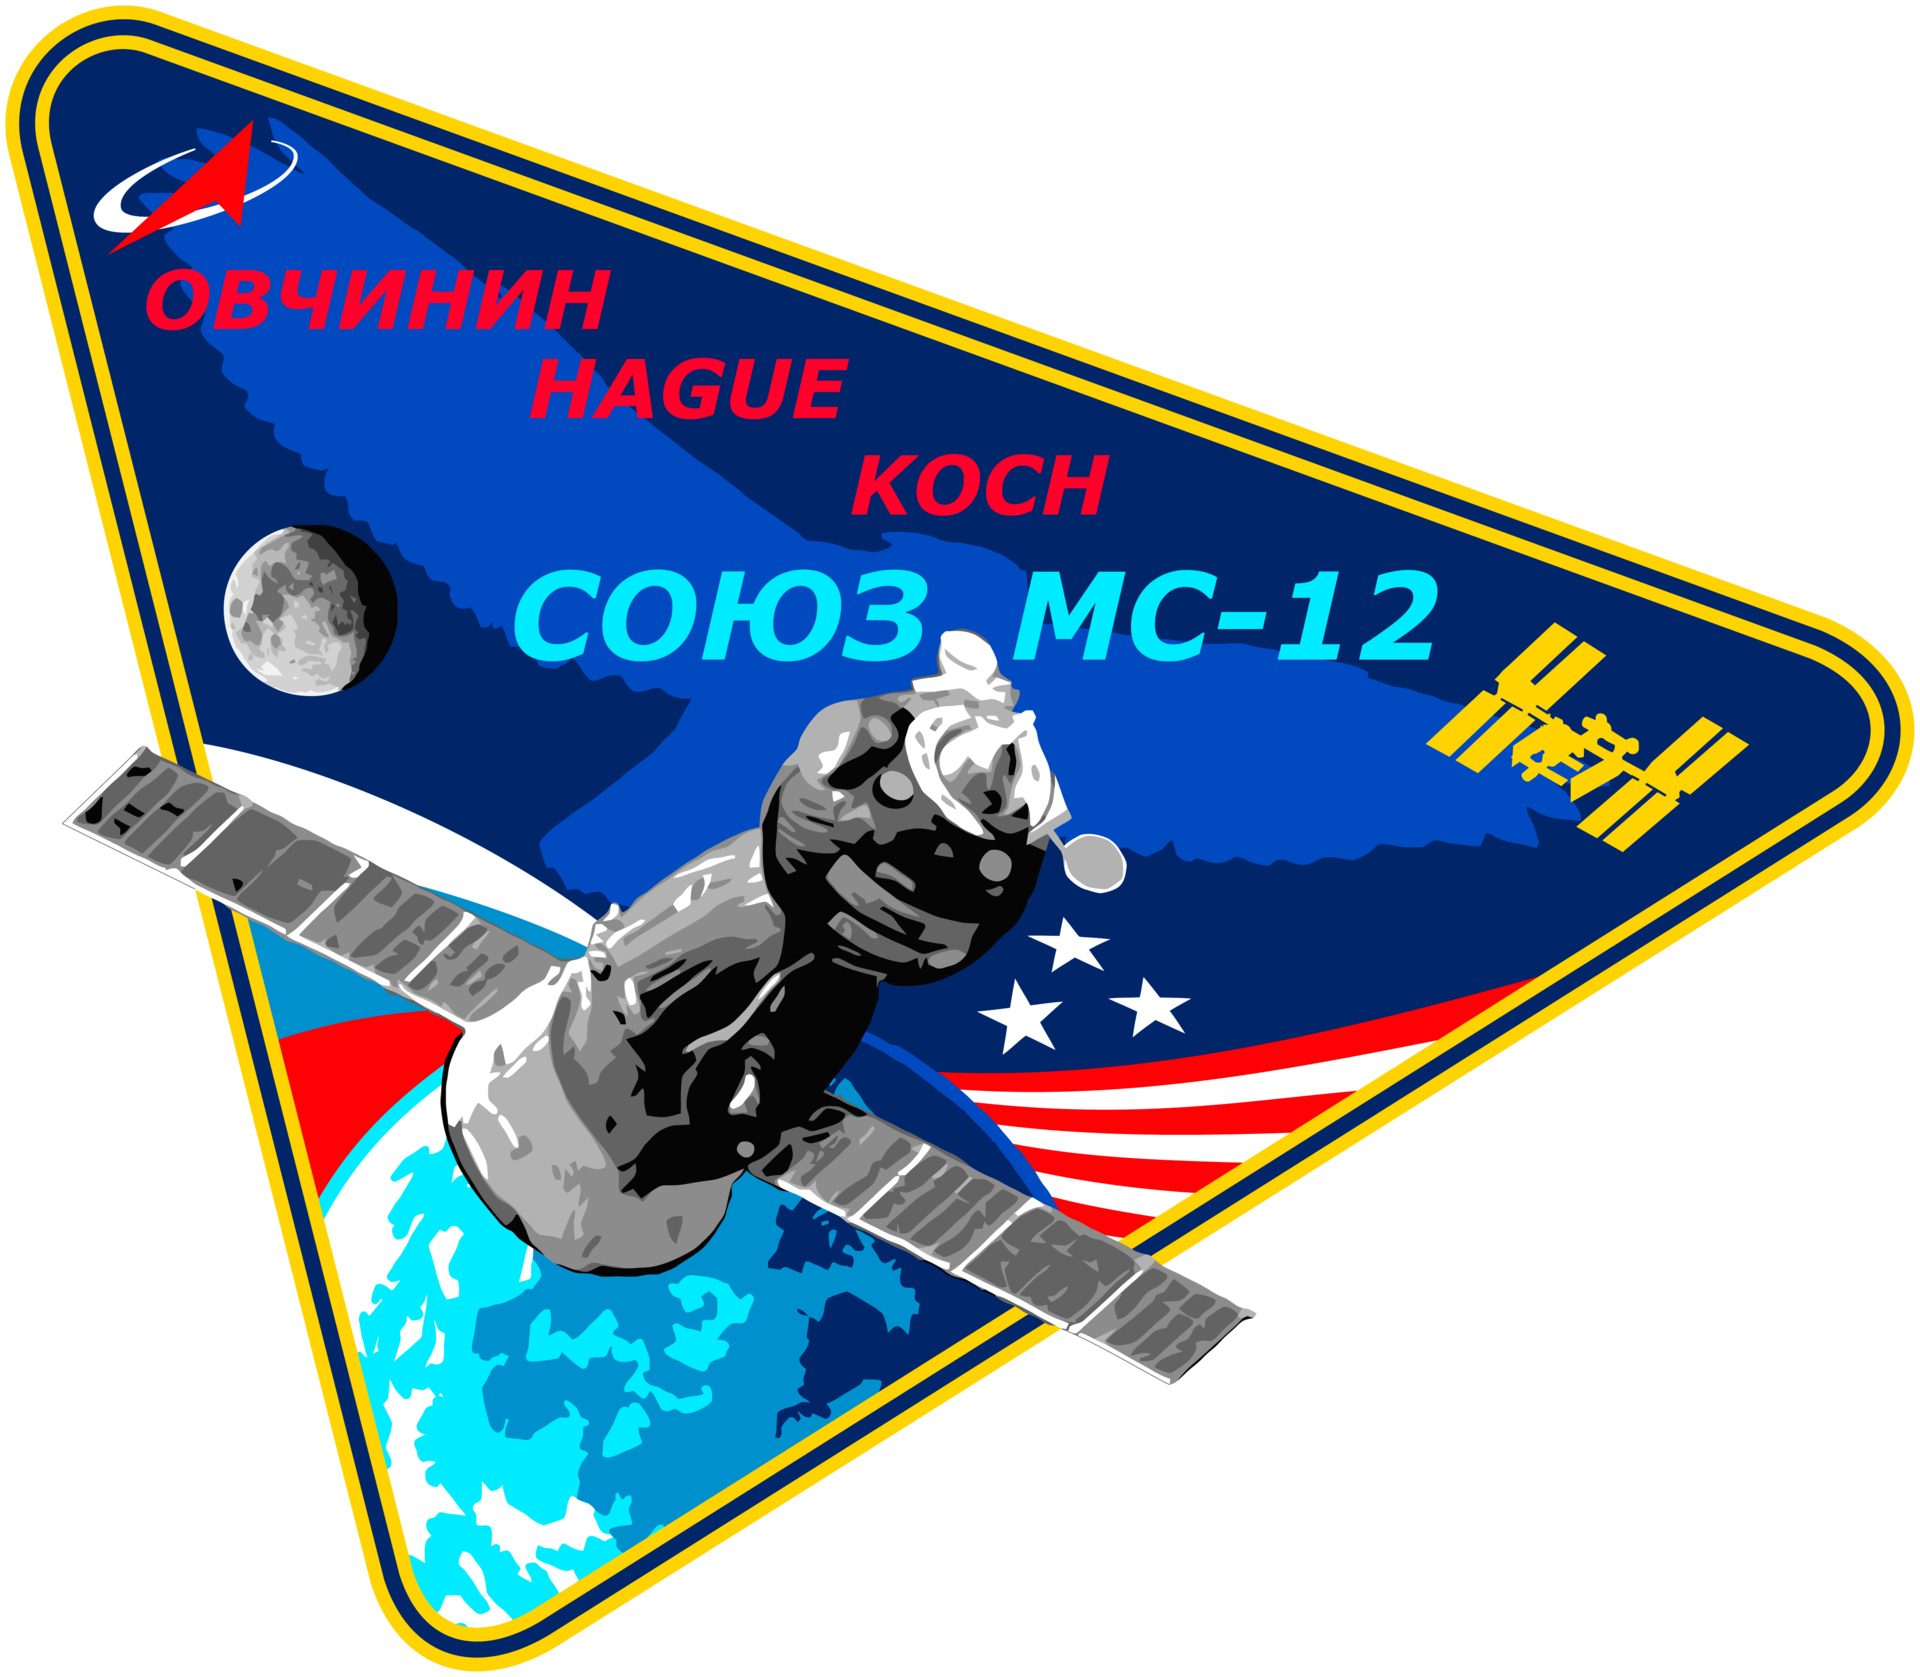 Mission patch for Soyuz MS-12